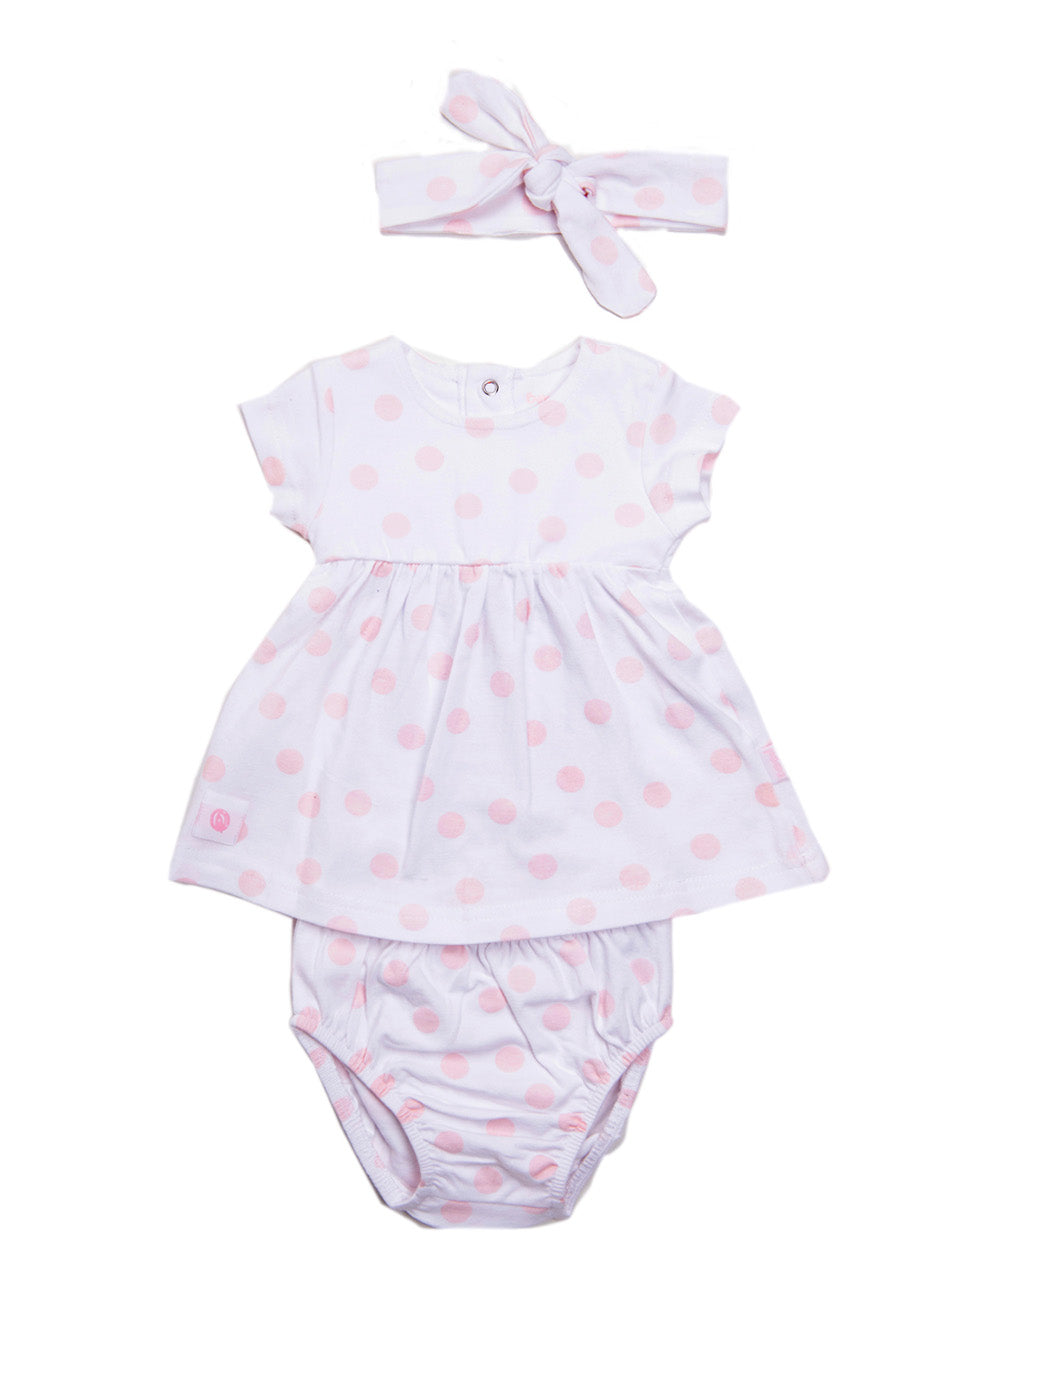 Baby Outfit 3pcs-11073